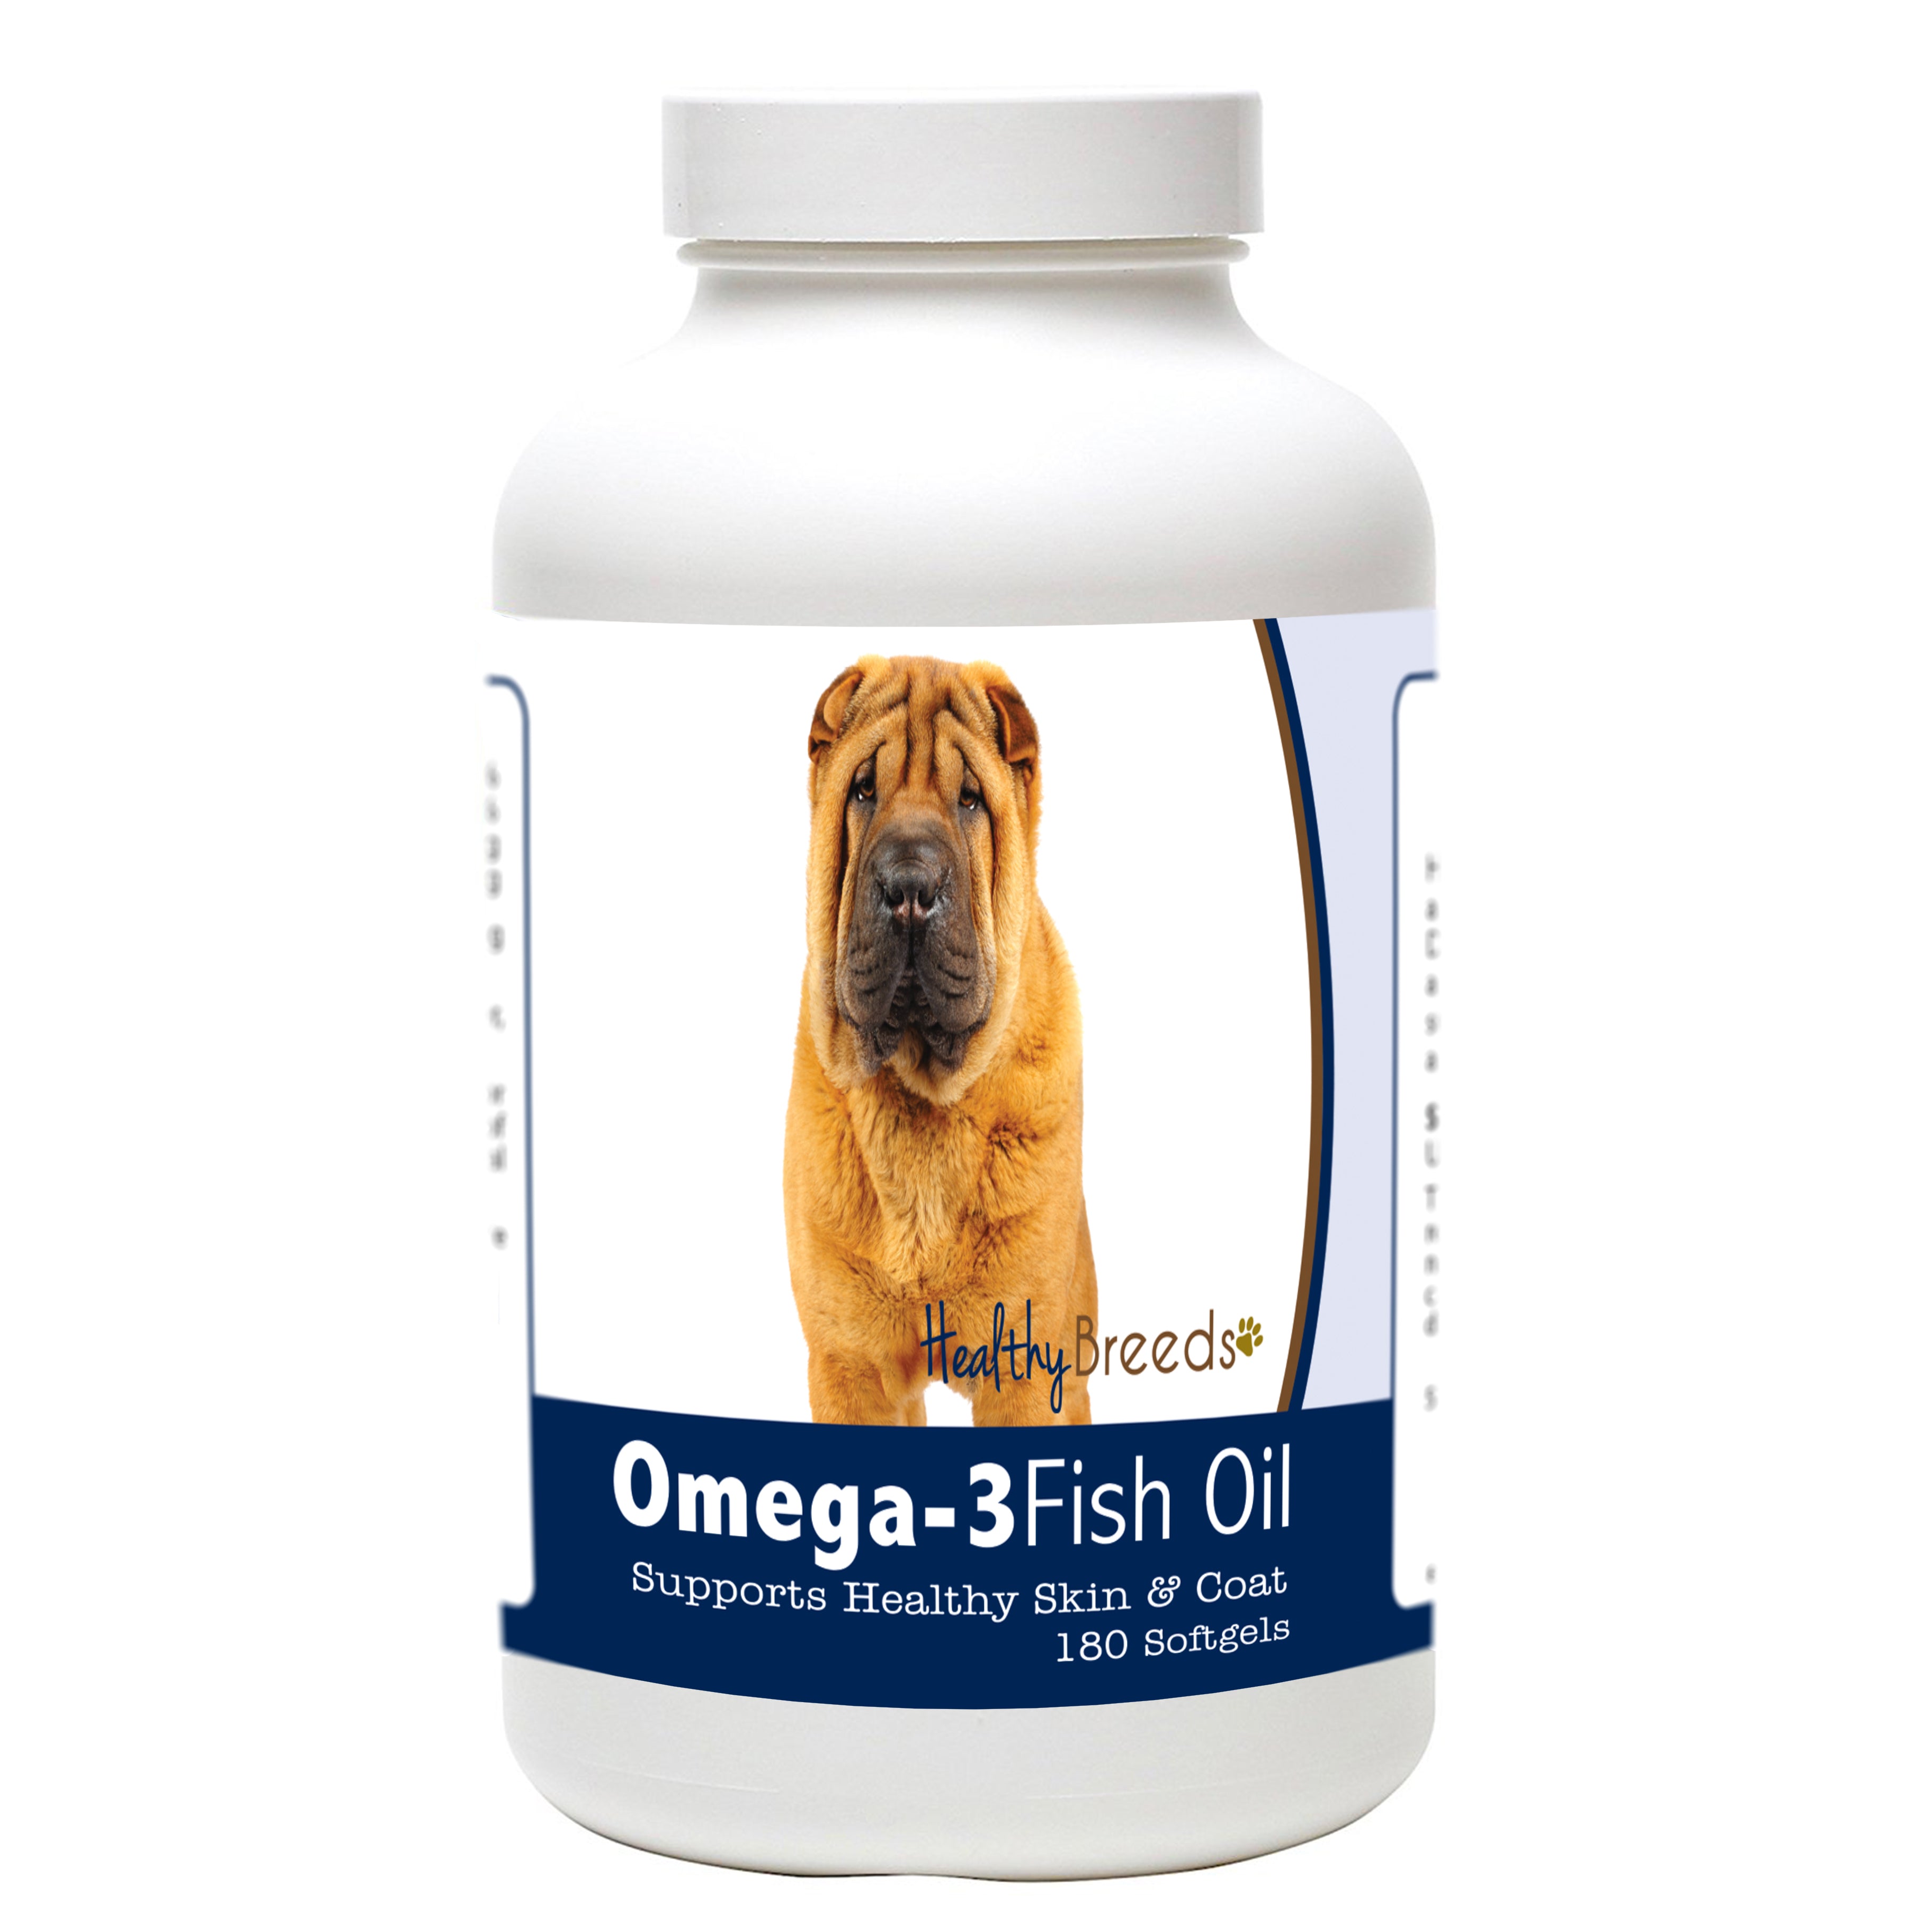 Chinese Shar Pei Omega-3 Fish Oil Softgels 180 Count